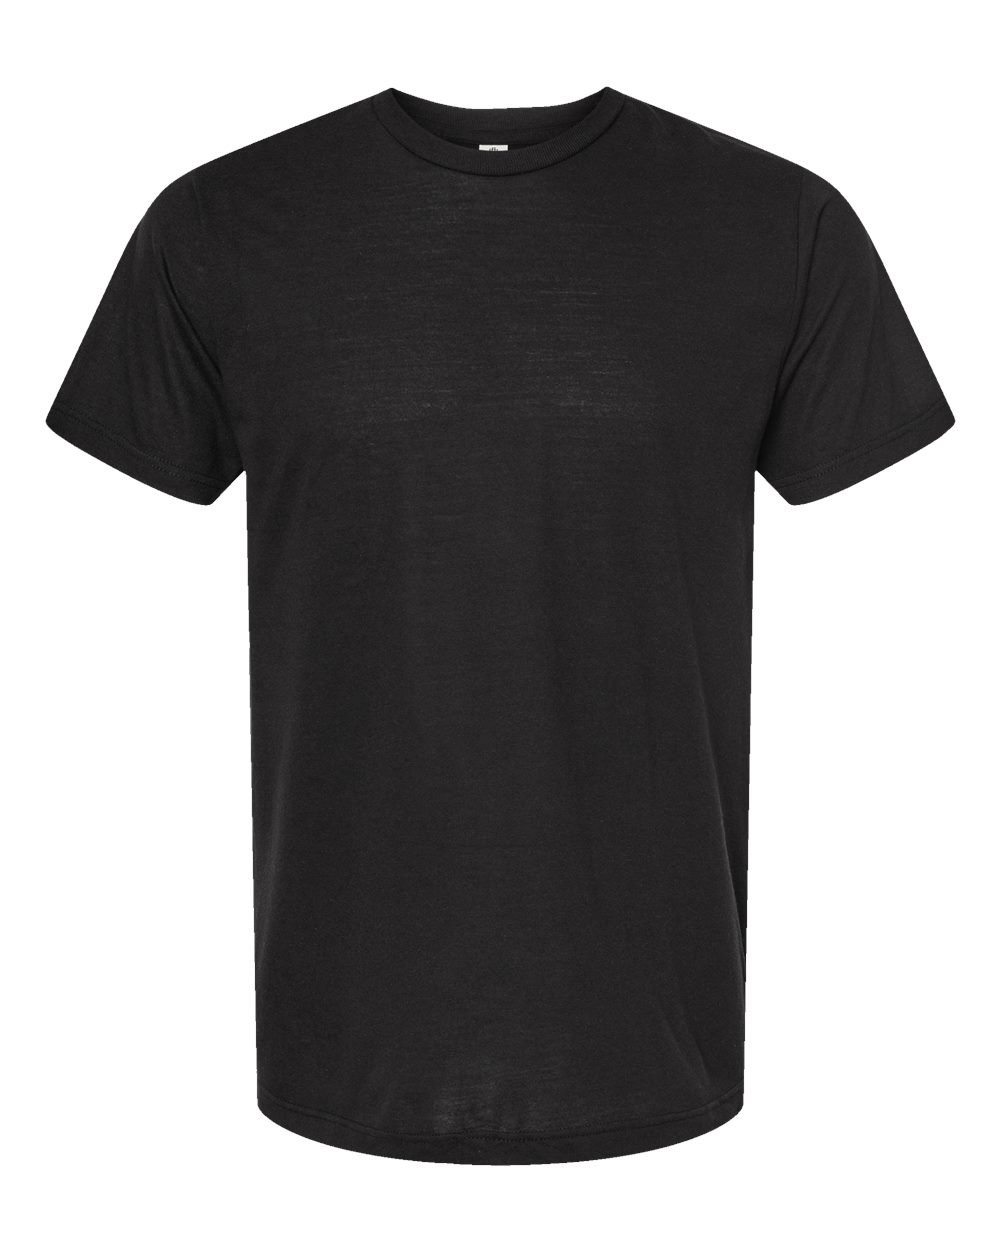 click to view Solid Black Tri Blend